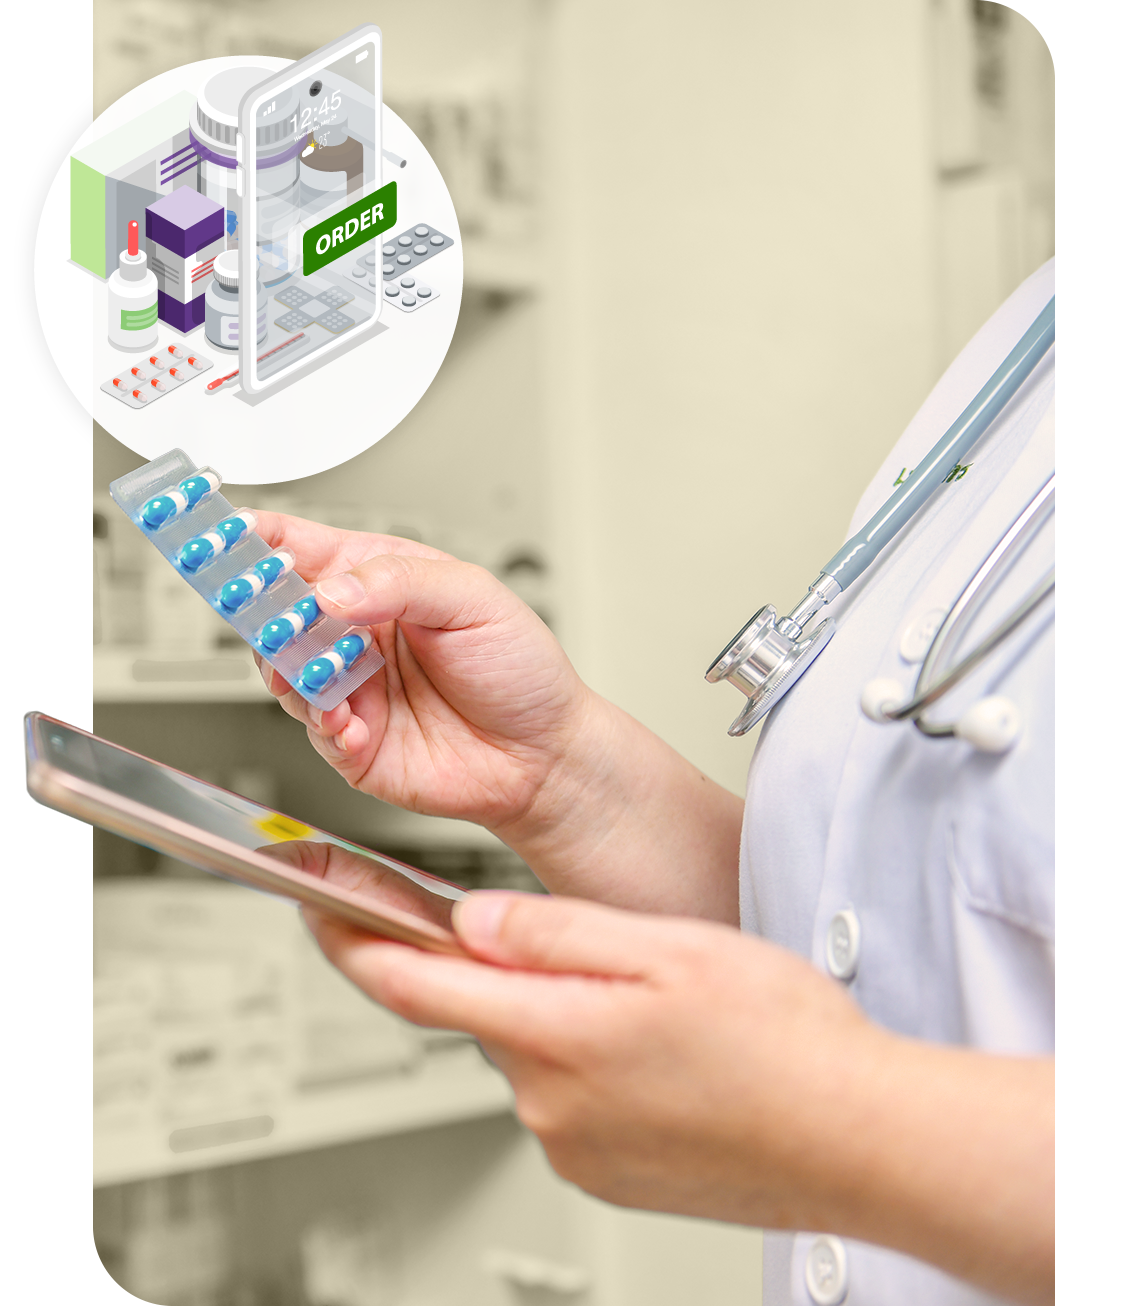 A medical professional holding prescription pills while looking at a tablet.